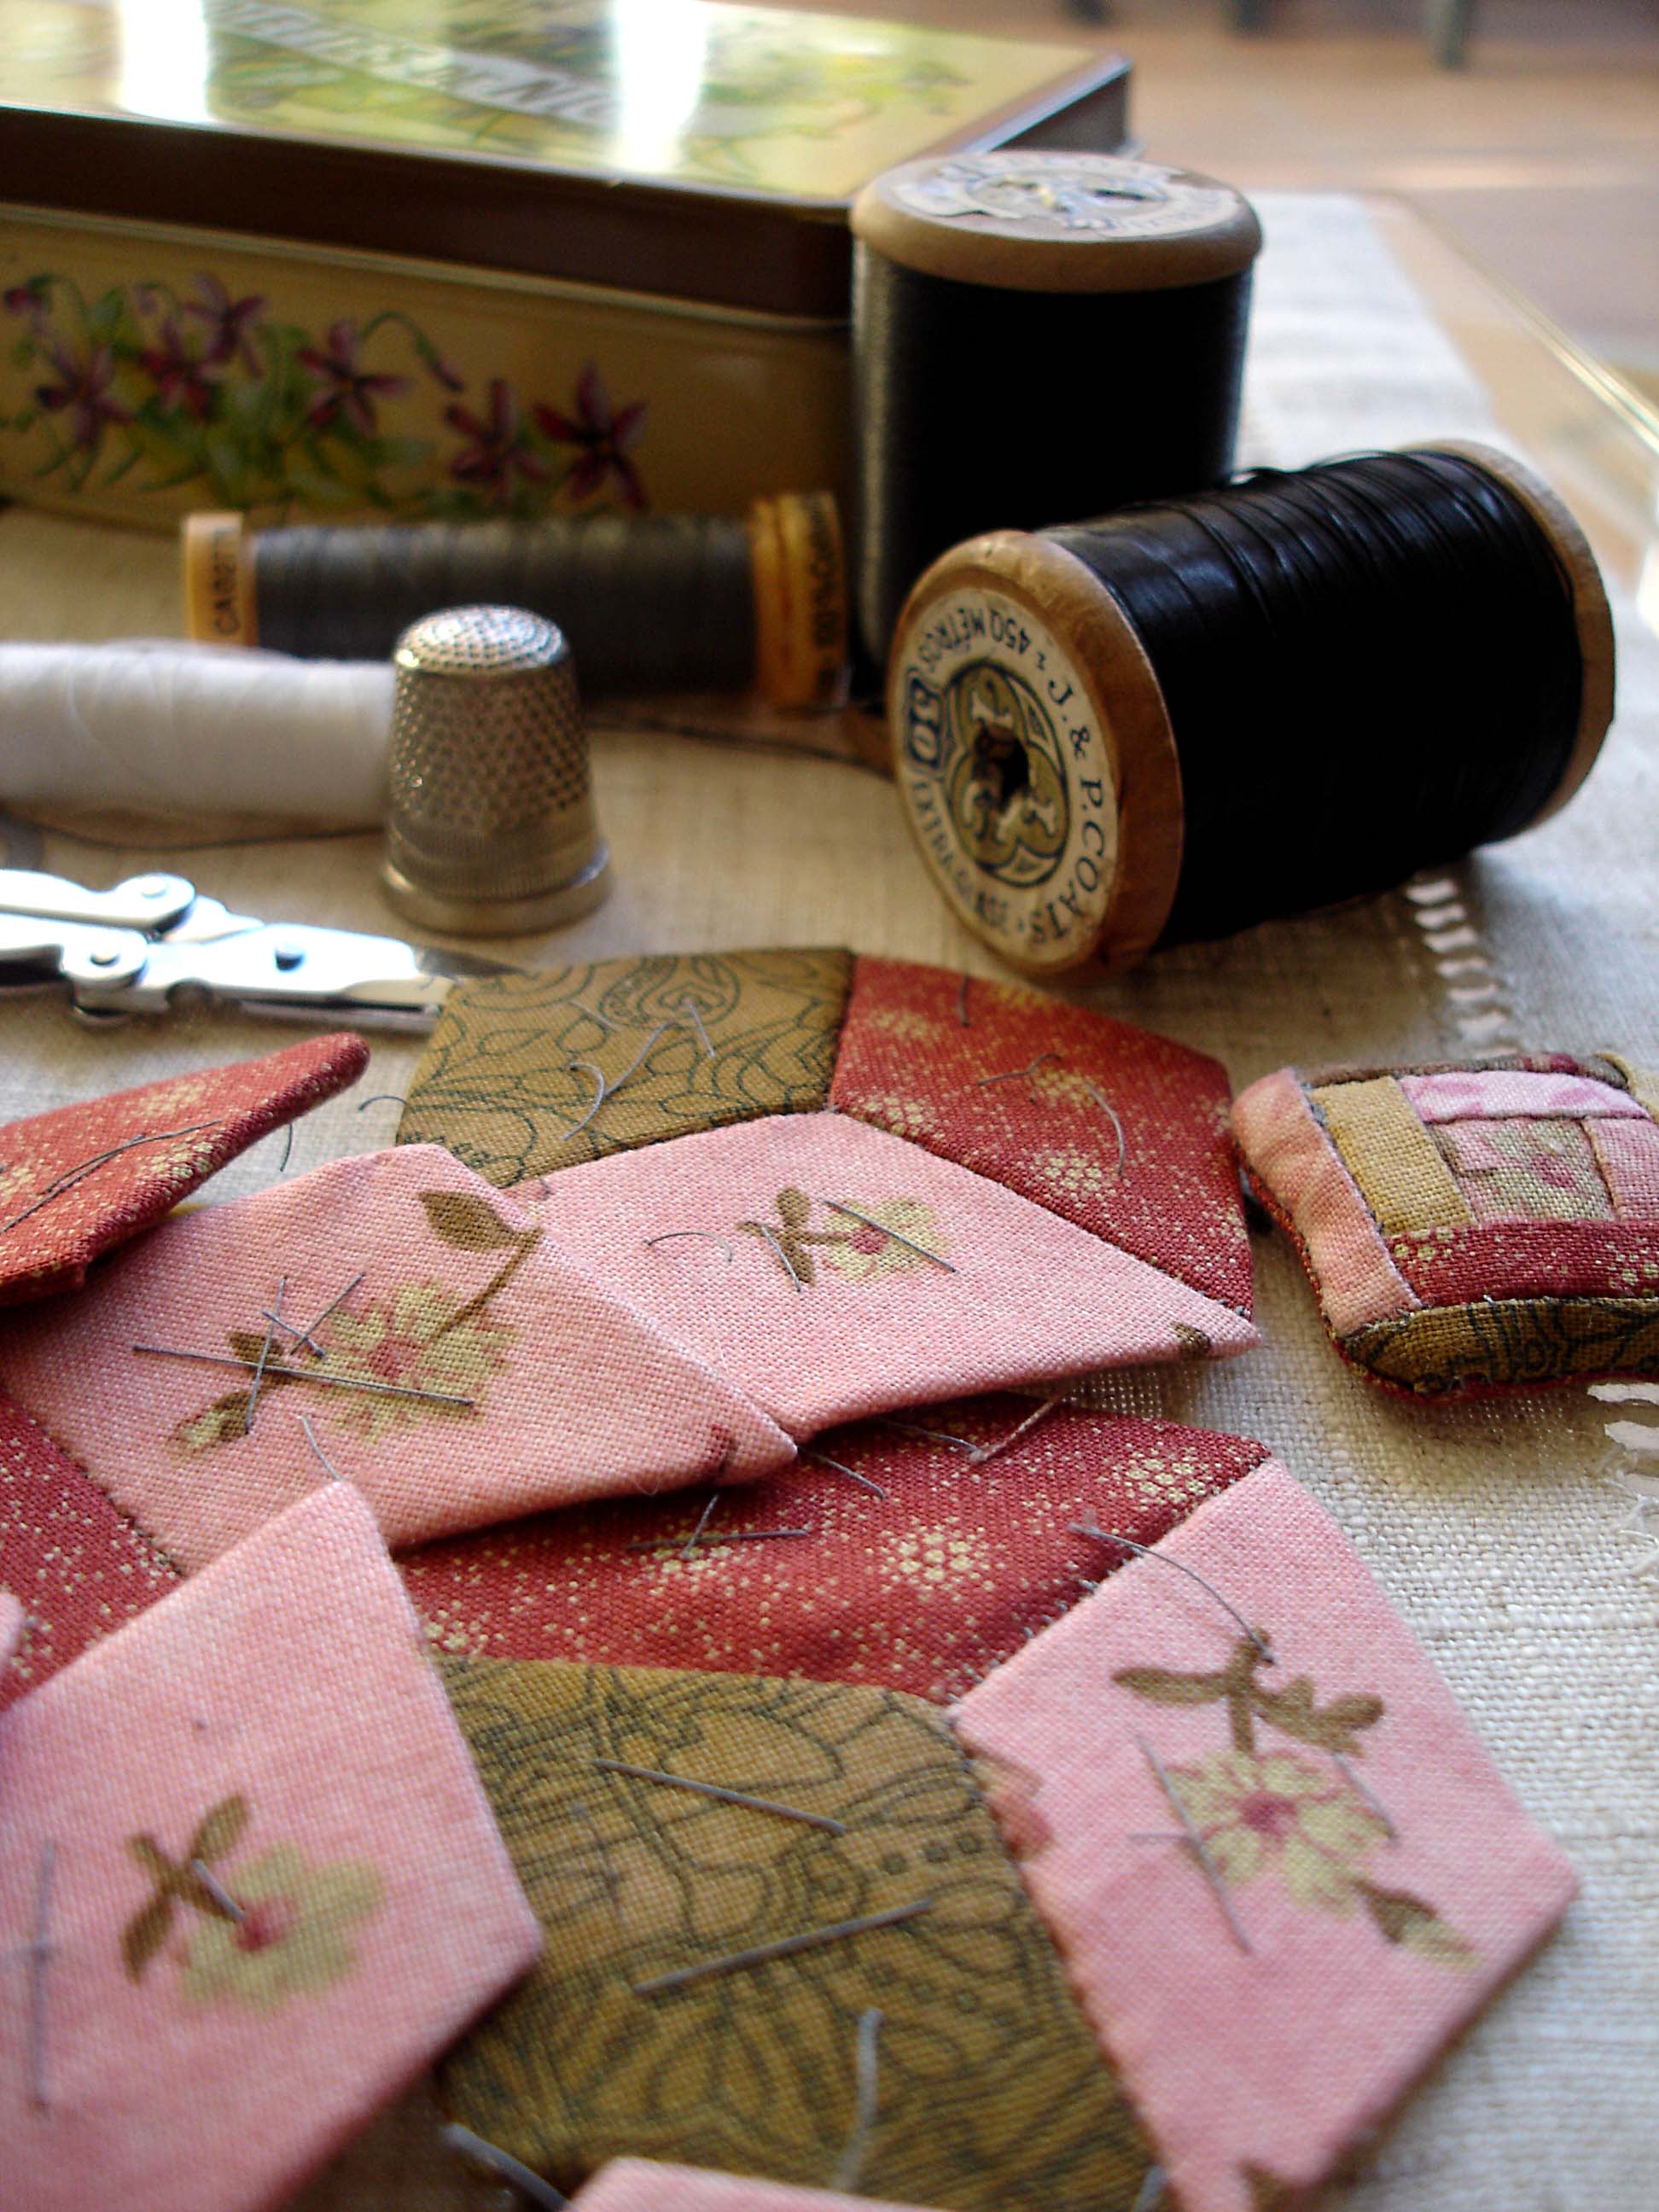 Diamonds of fabric tacked to paper have been pieced in threes into hexagons. In the background are scissors, reels of thread, a thimble, and a tin.